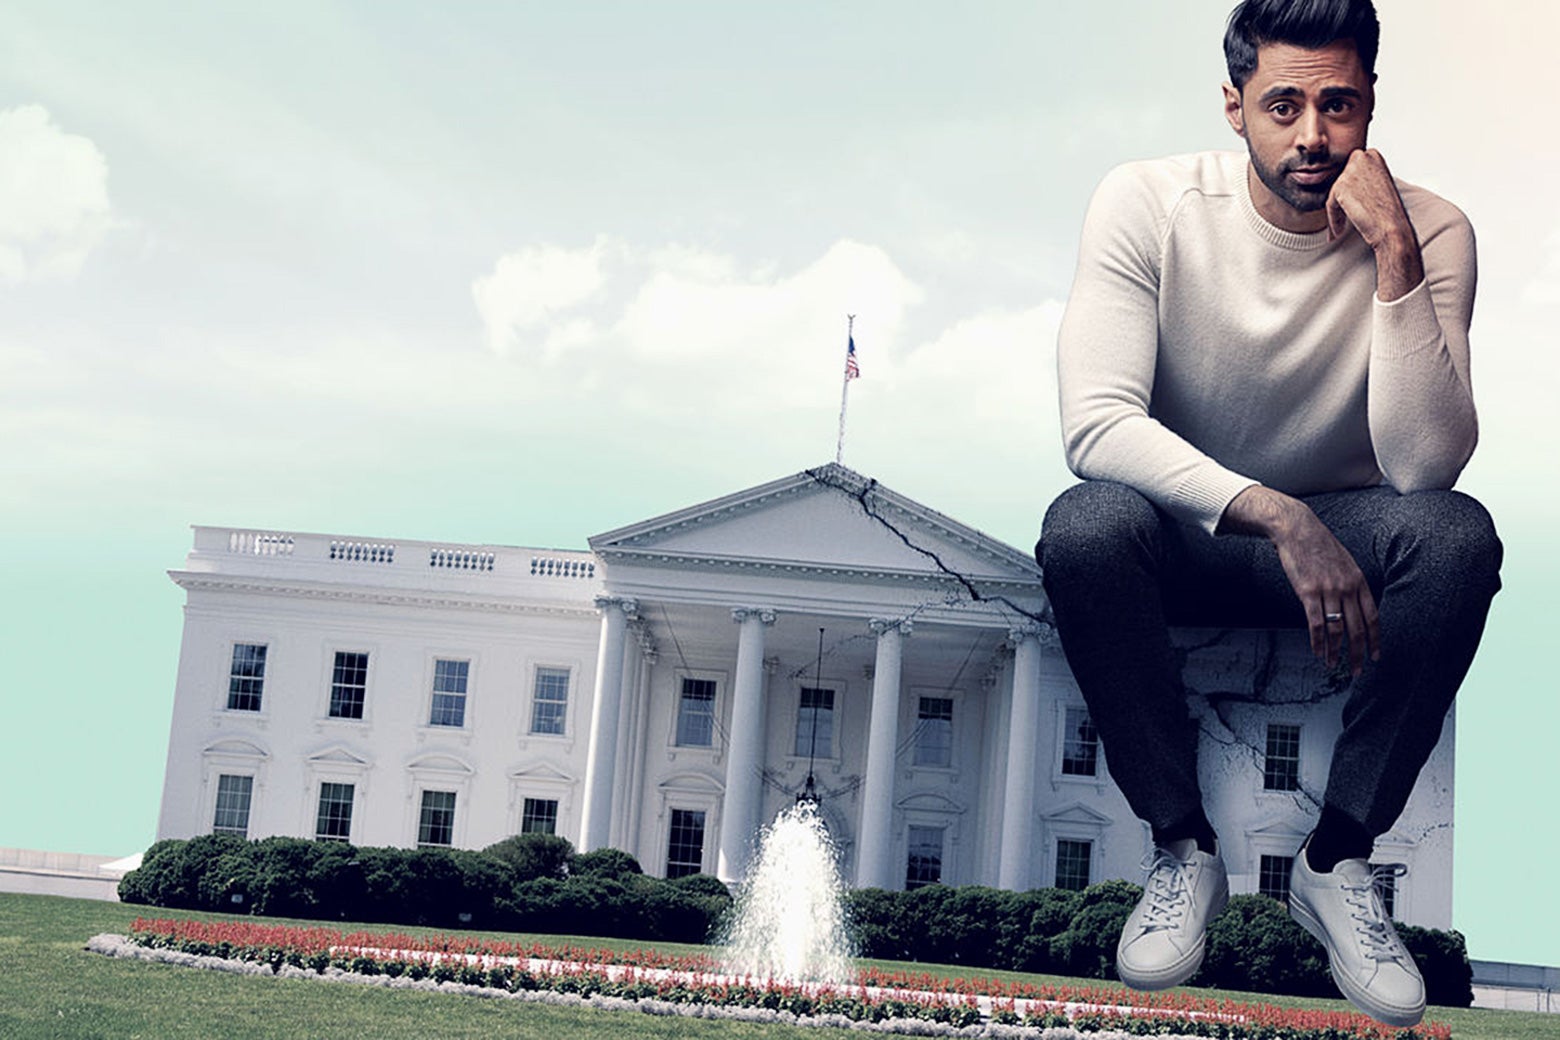 In this photo illustration, Hasan Minhaj sits on one corner of the White House. He's very large, and the White House is very small and seat-size.